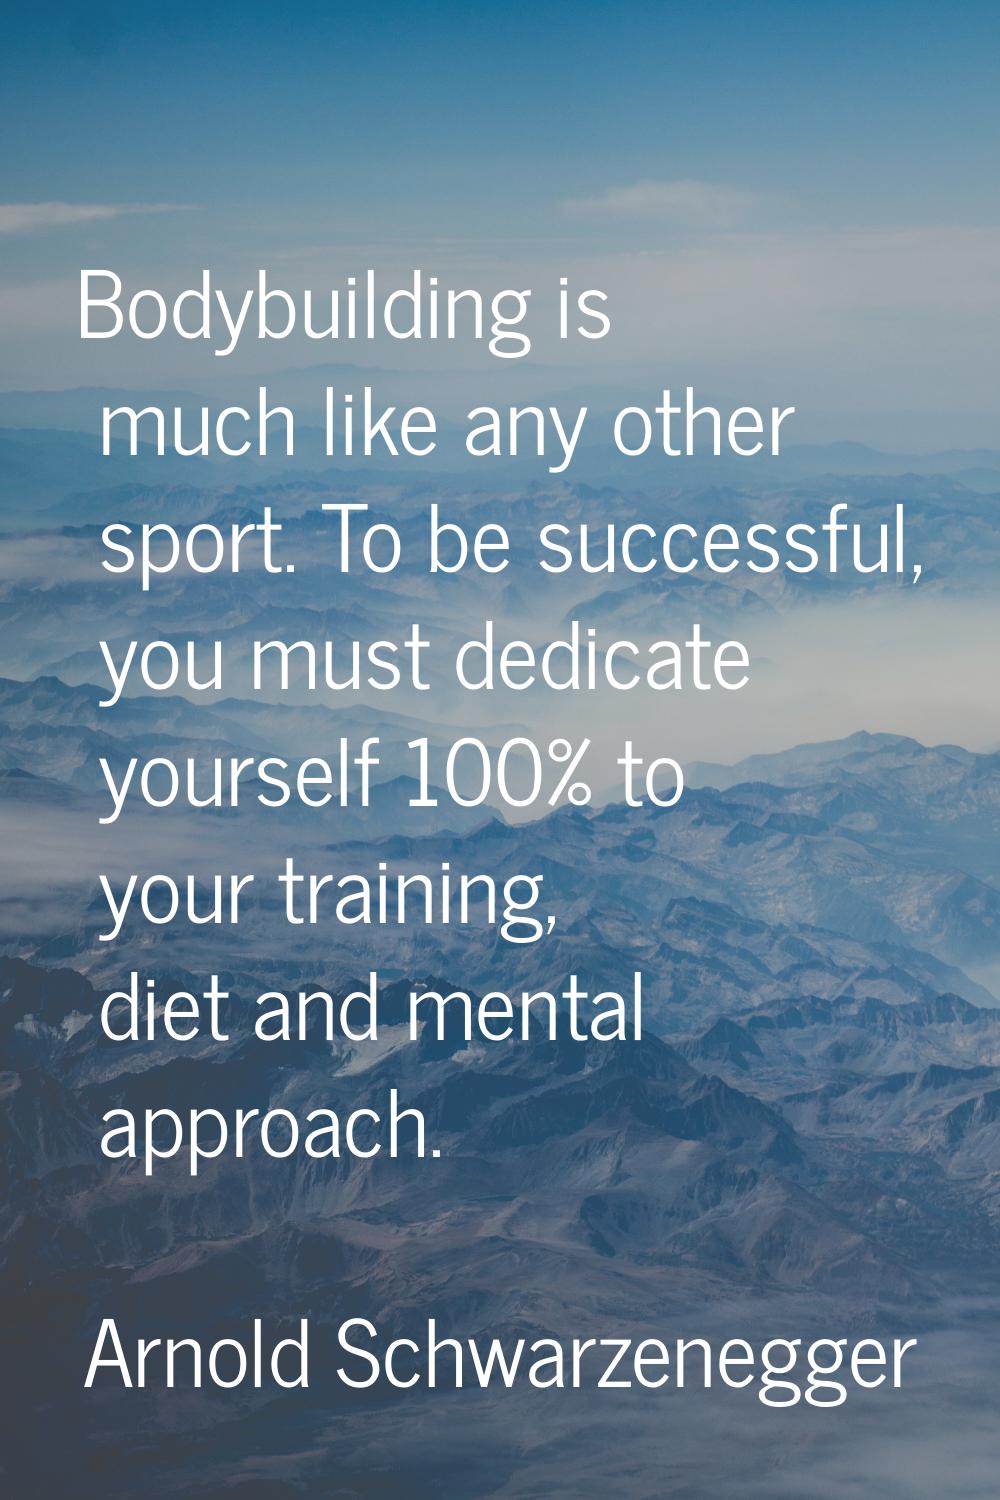 Bodybuilding is much like any other sport. To be successful, you must dedicate yourself 100% to you